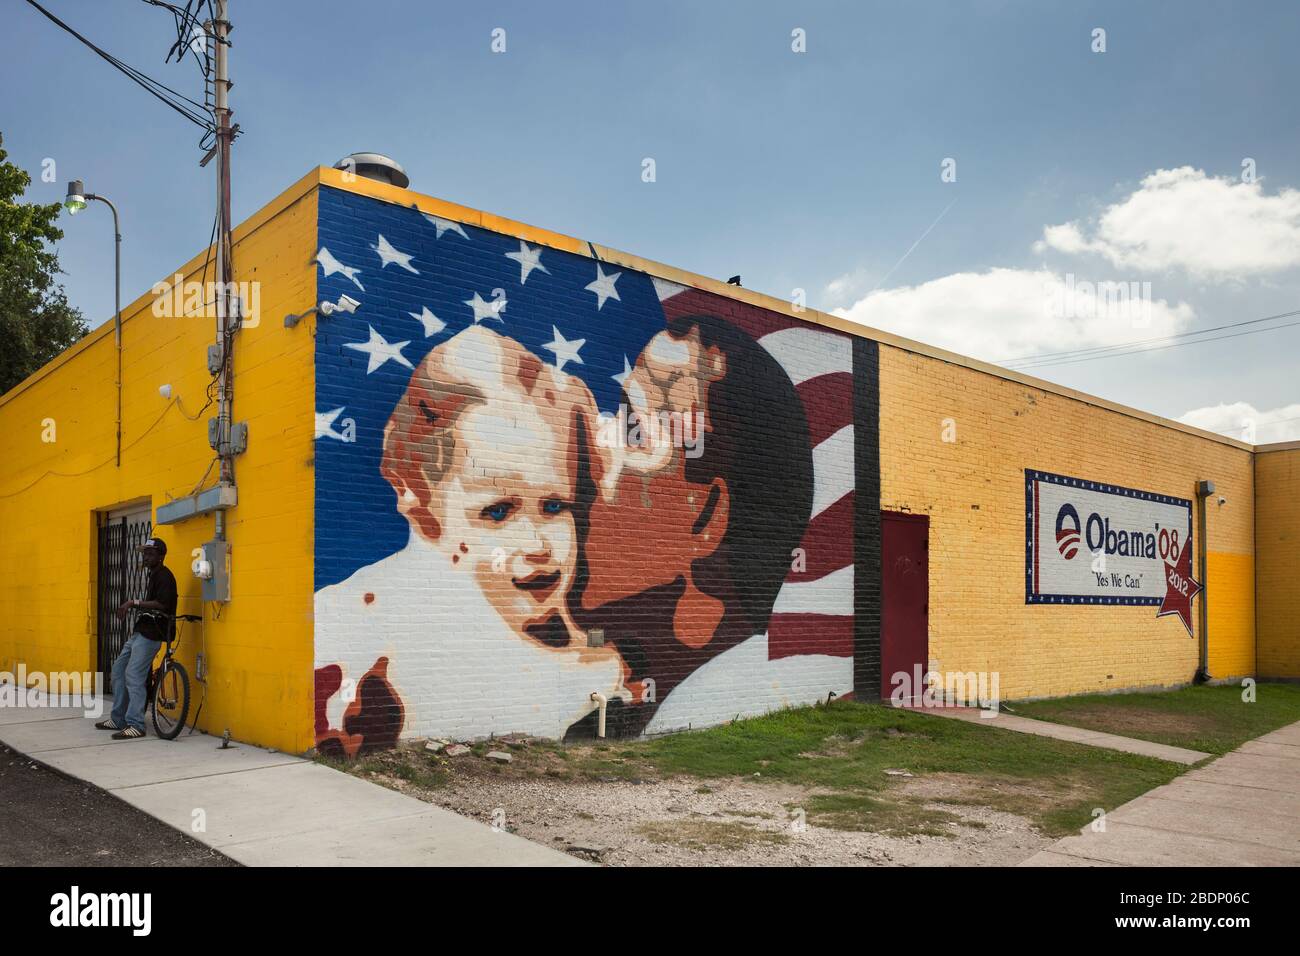 obamas-mural-of-electoral-propaganda-on-a-yellow-wall-close-to-a-black-race-man-leaning-on-a-bicycle-west-alabama-st-midtown-houston-texas-2BDP06C.jpg